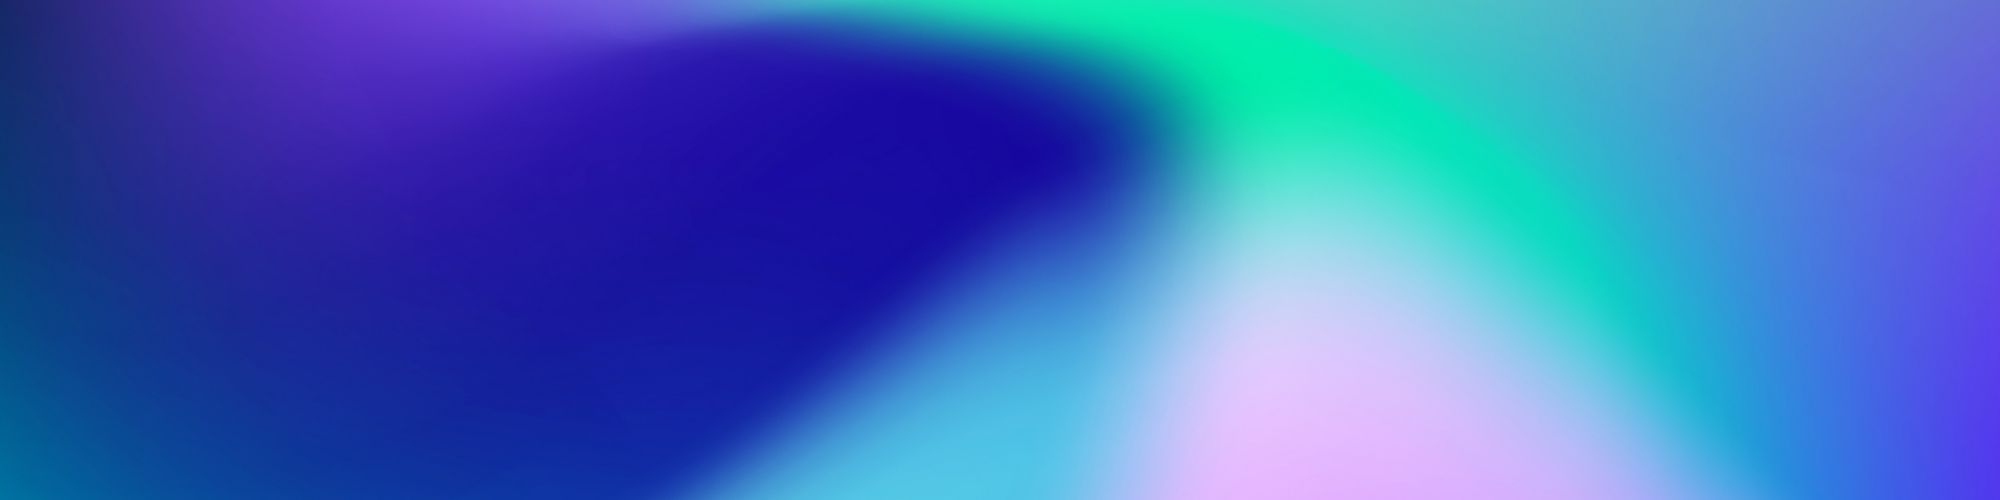 Blue green abstract banner